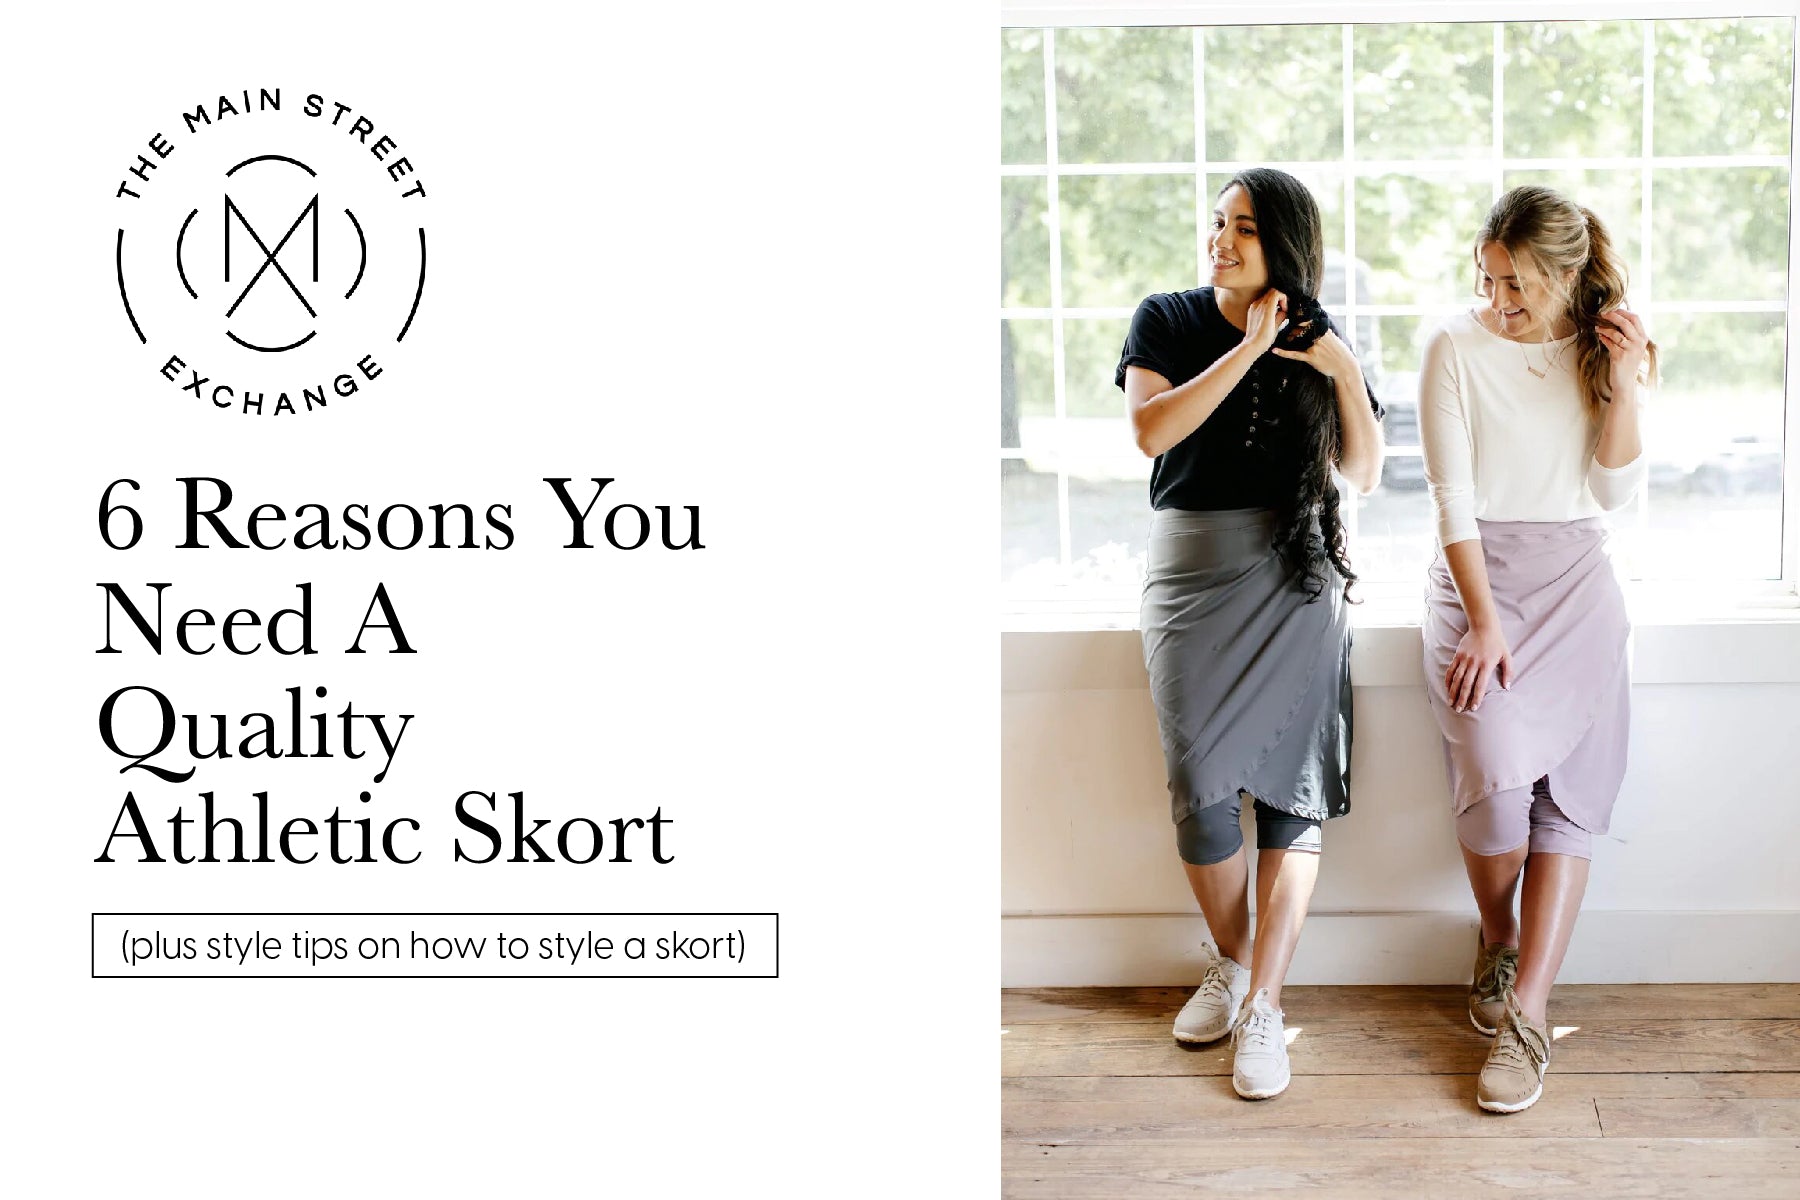 6 Reasons You Need A Quality Athletic Skort (plus style tips on how to style a skort)